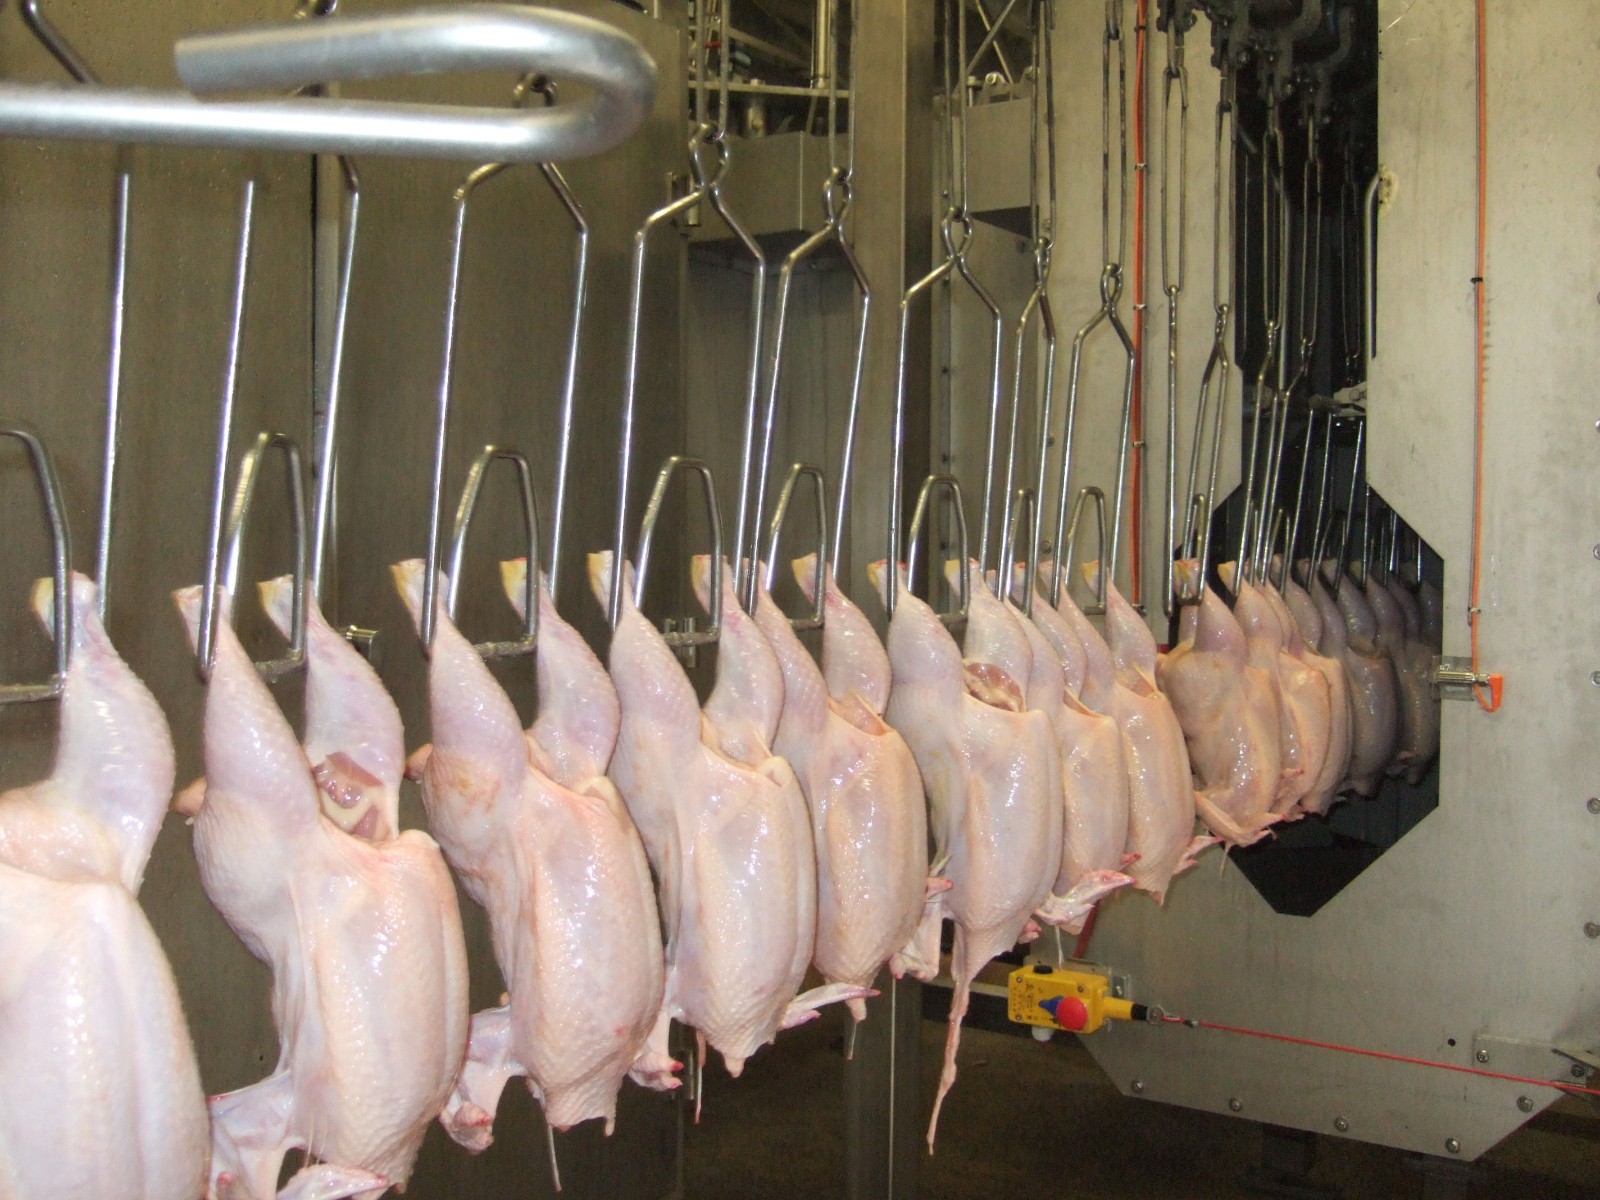 Danish-poultry-sector-steps-up-to-stem-campylobacter.jpg